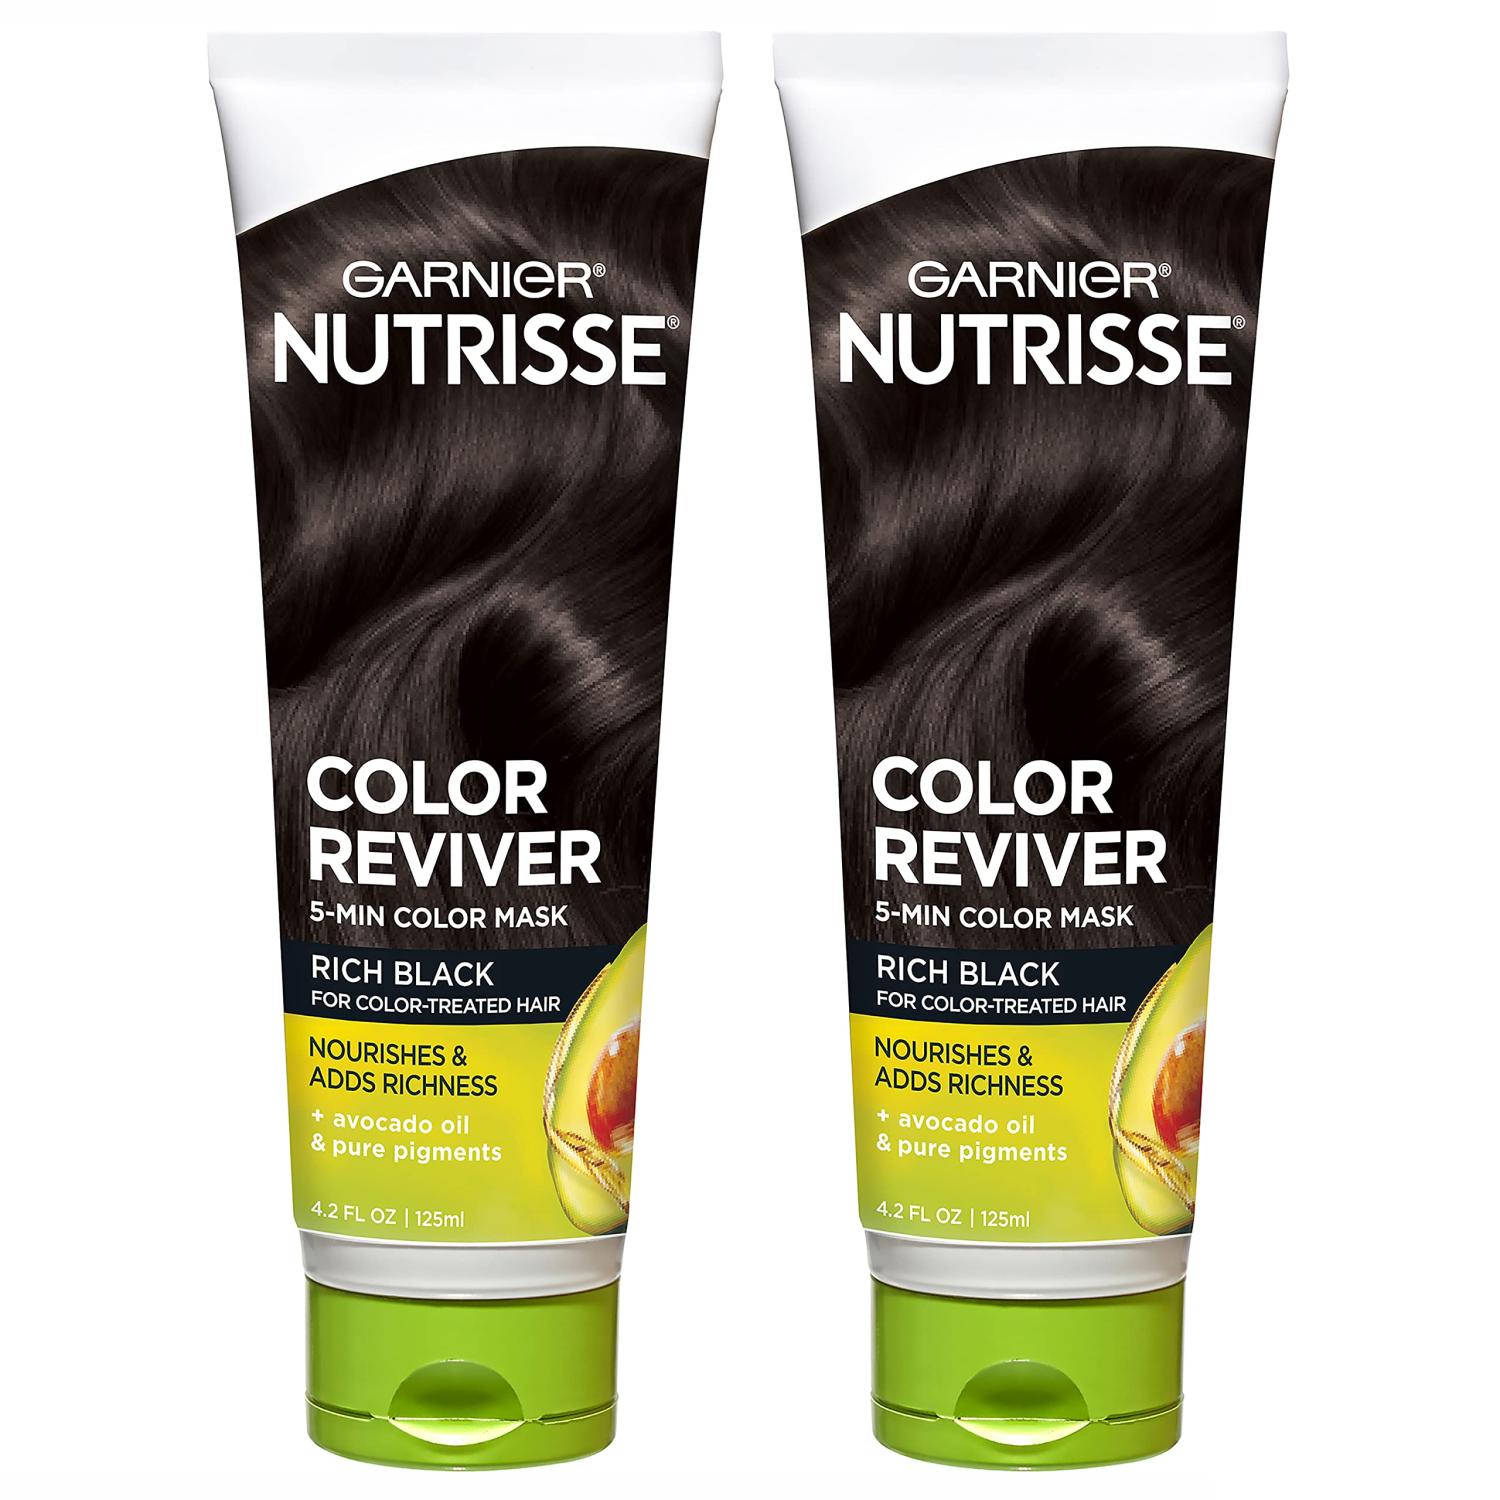 Garnier Nutrisse Color Reviver 5 Minute Nourishing Hair Color Mask with  Avocado Oil Delivers Day 1 Color Results, for Color Treated Hair, Rich  Black,  fl oz, 2 Count (Packaging May Vary)